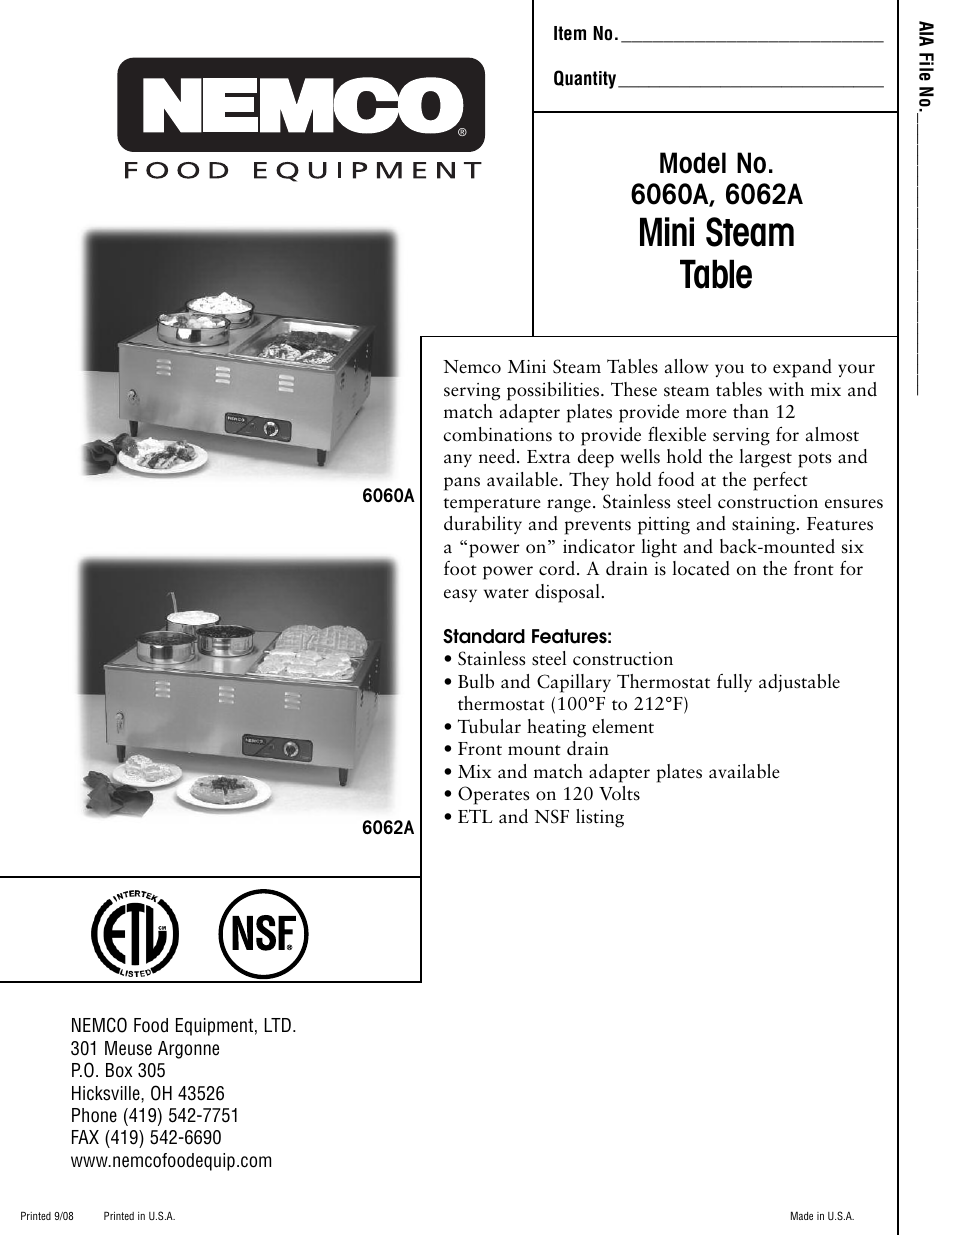 Nemco Food Equipment Mini Steamtables - Spec Sheet User Manual | 2 pages